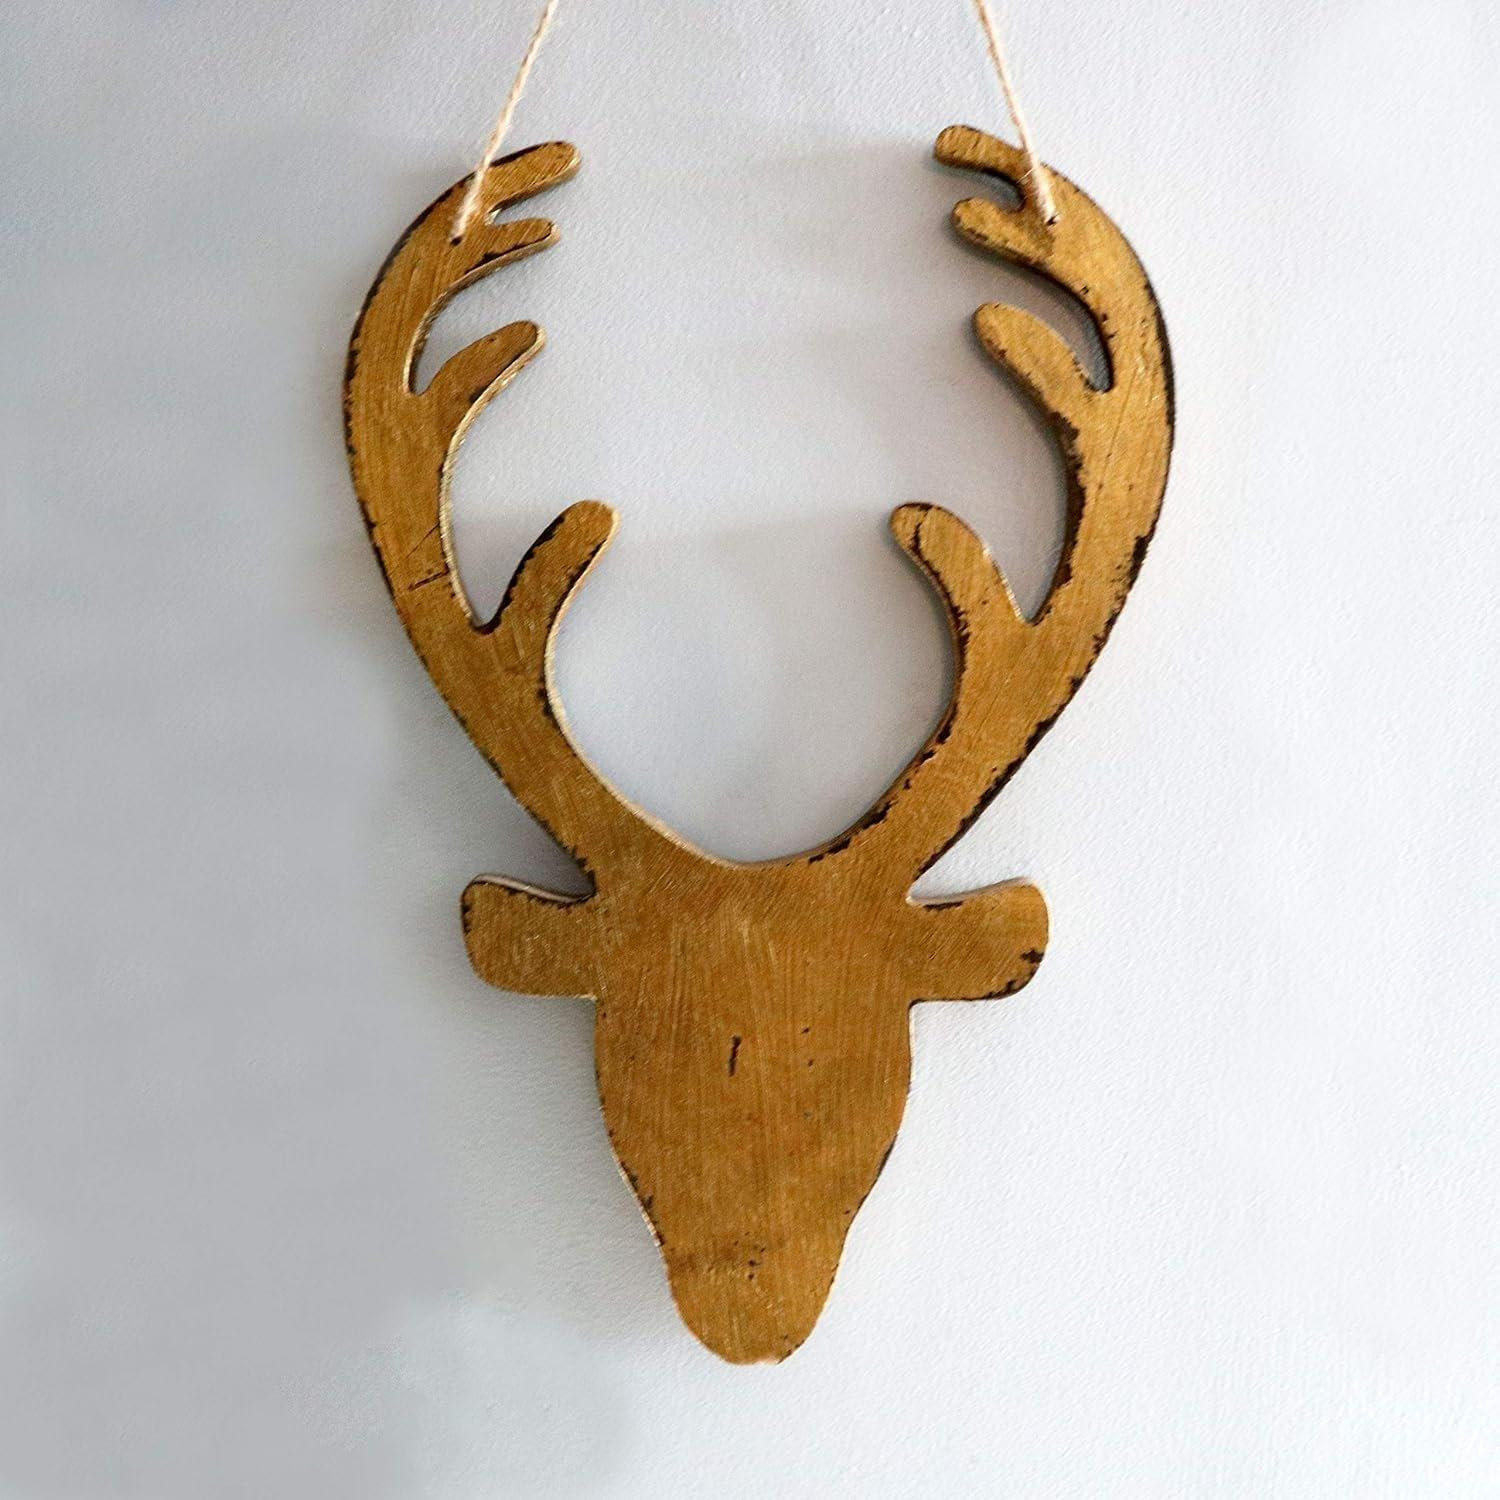 26cm Golden Christmas Wooden Hanging Deer Head Wall Decoration Xmas Home Office Holiday Decorative Centrepiece - image 1